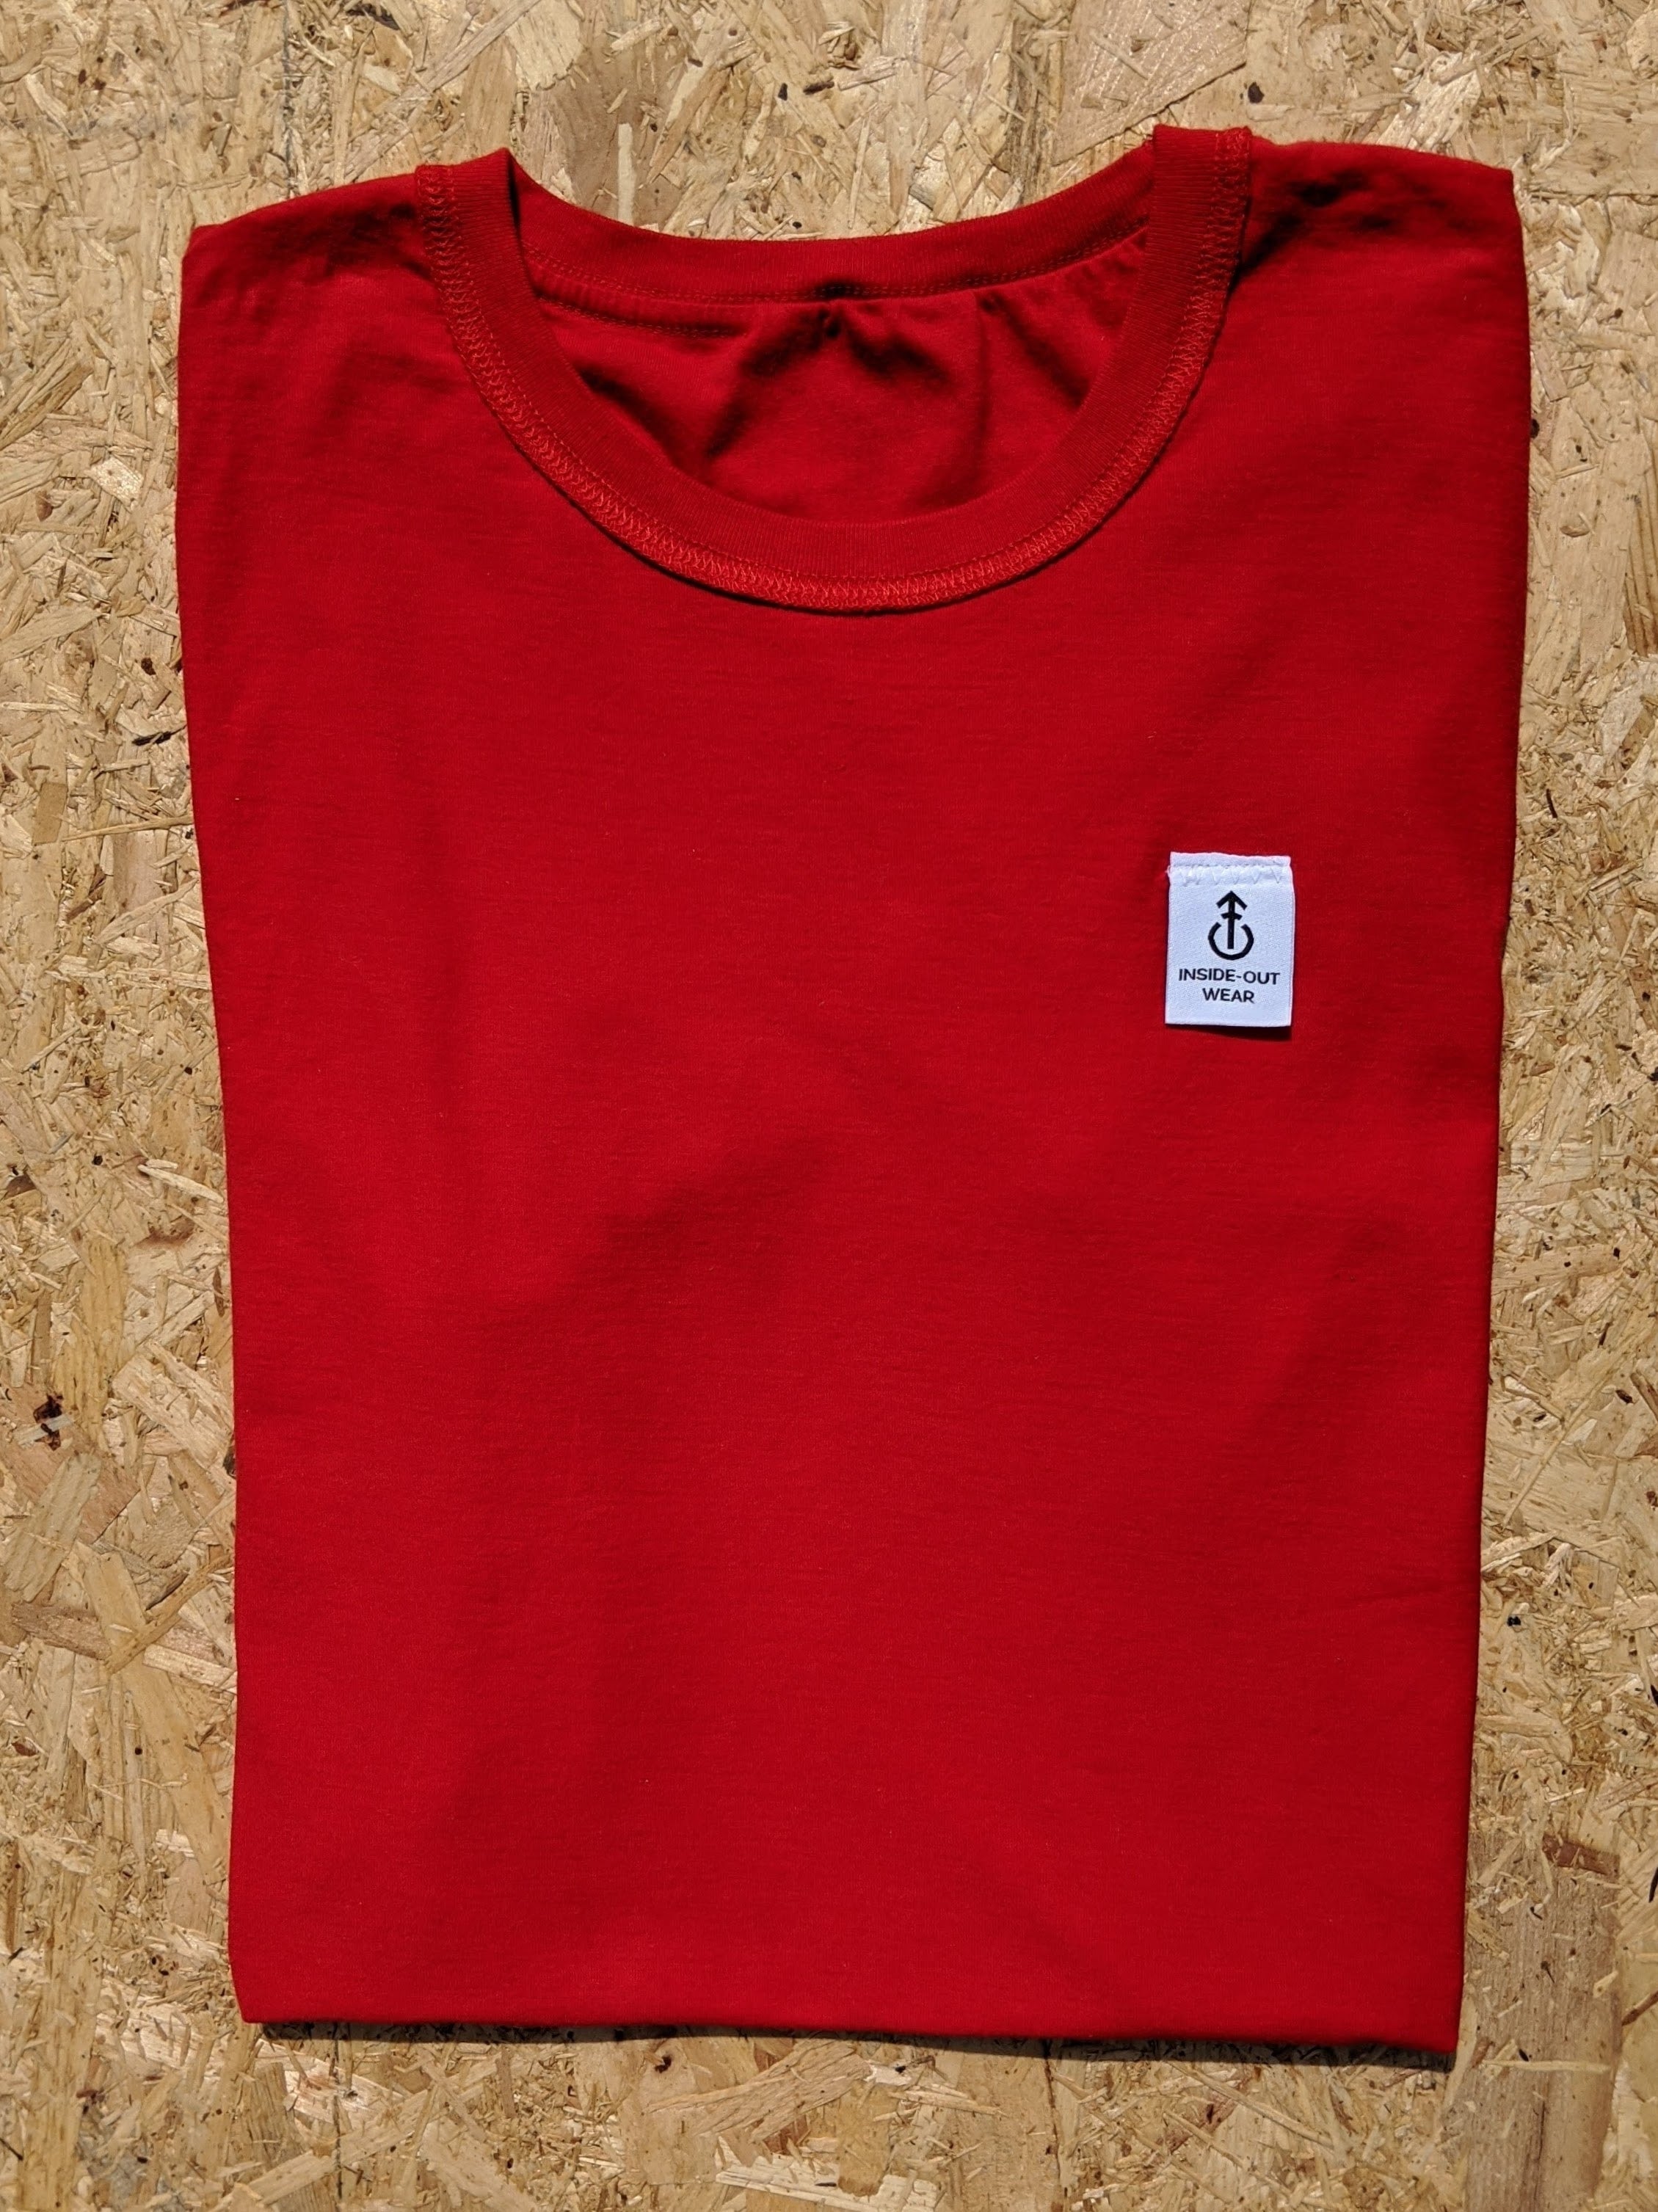 unisex inside-out t shirt in postbox red